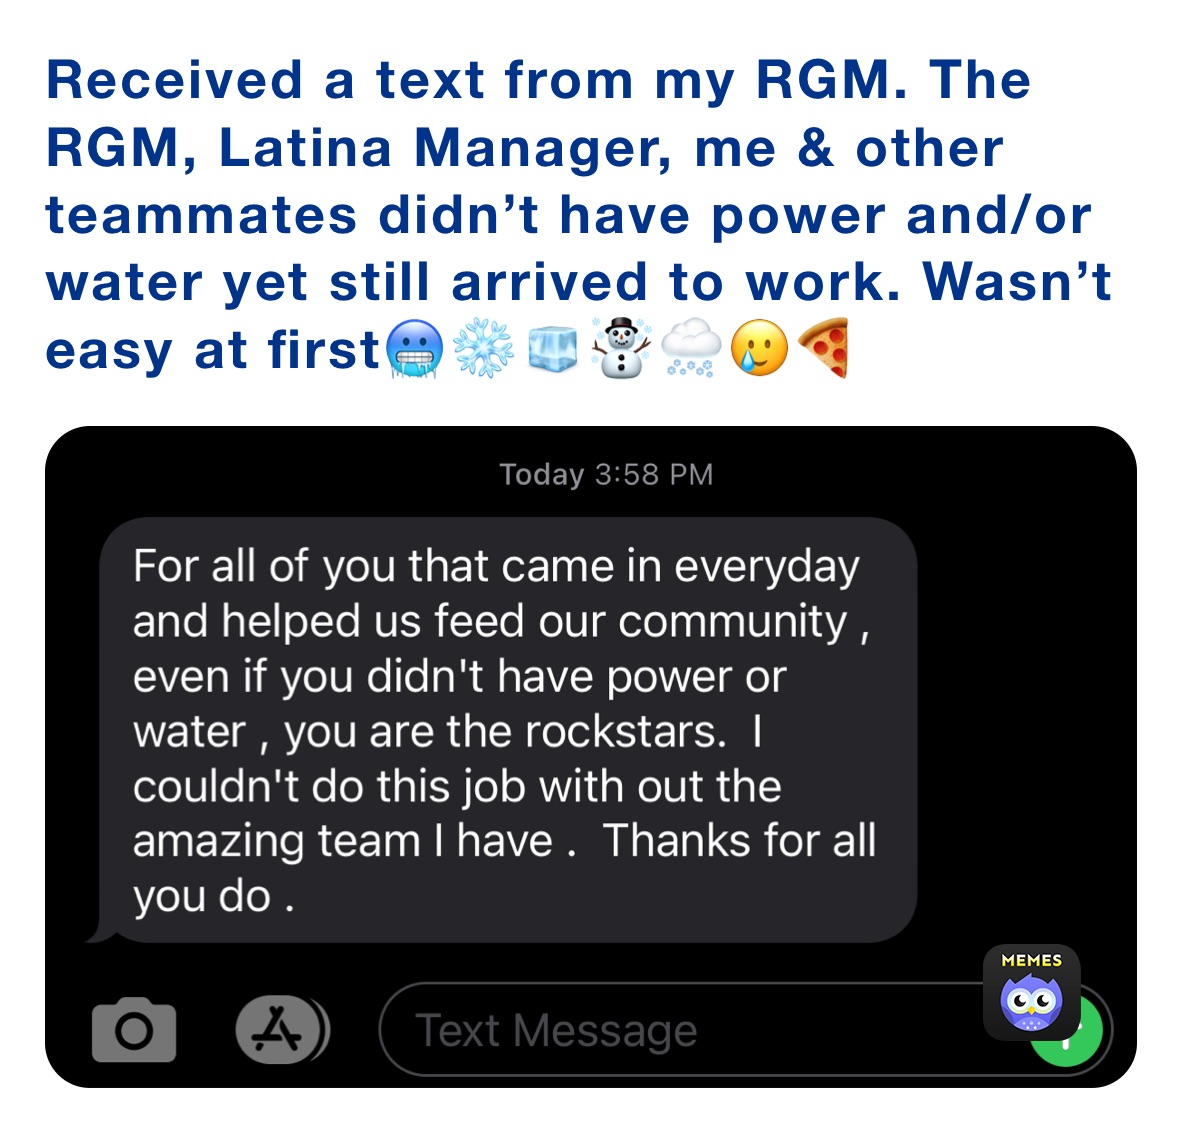 Received a text from my RGM. The RGM, Latina Manager, me & other teammates didn’t have power and/or water yet still arrived to work. Wasn’t easy at first🥶❄️🧊☃️🌨🥲🍕